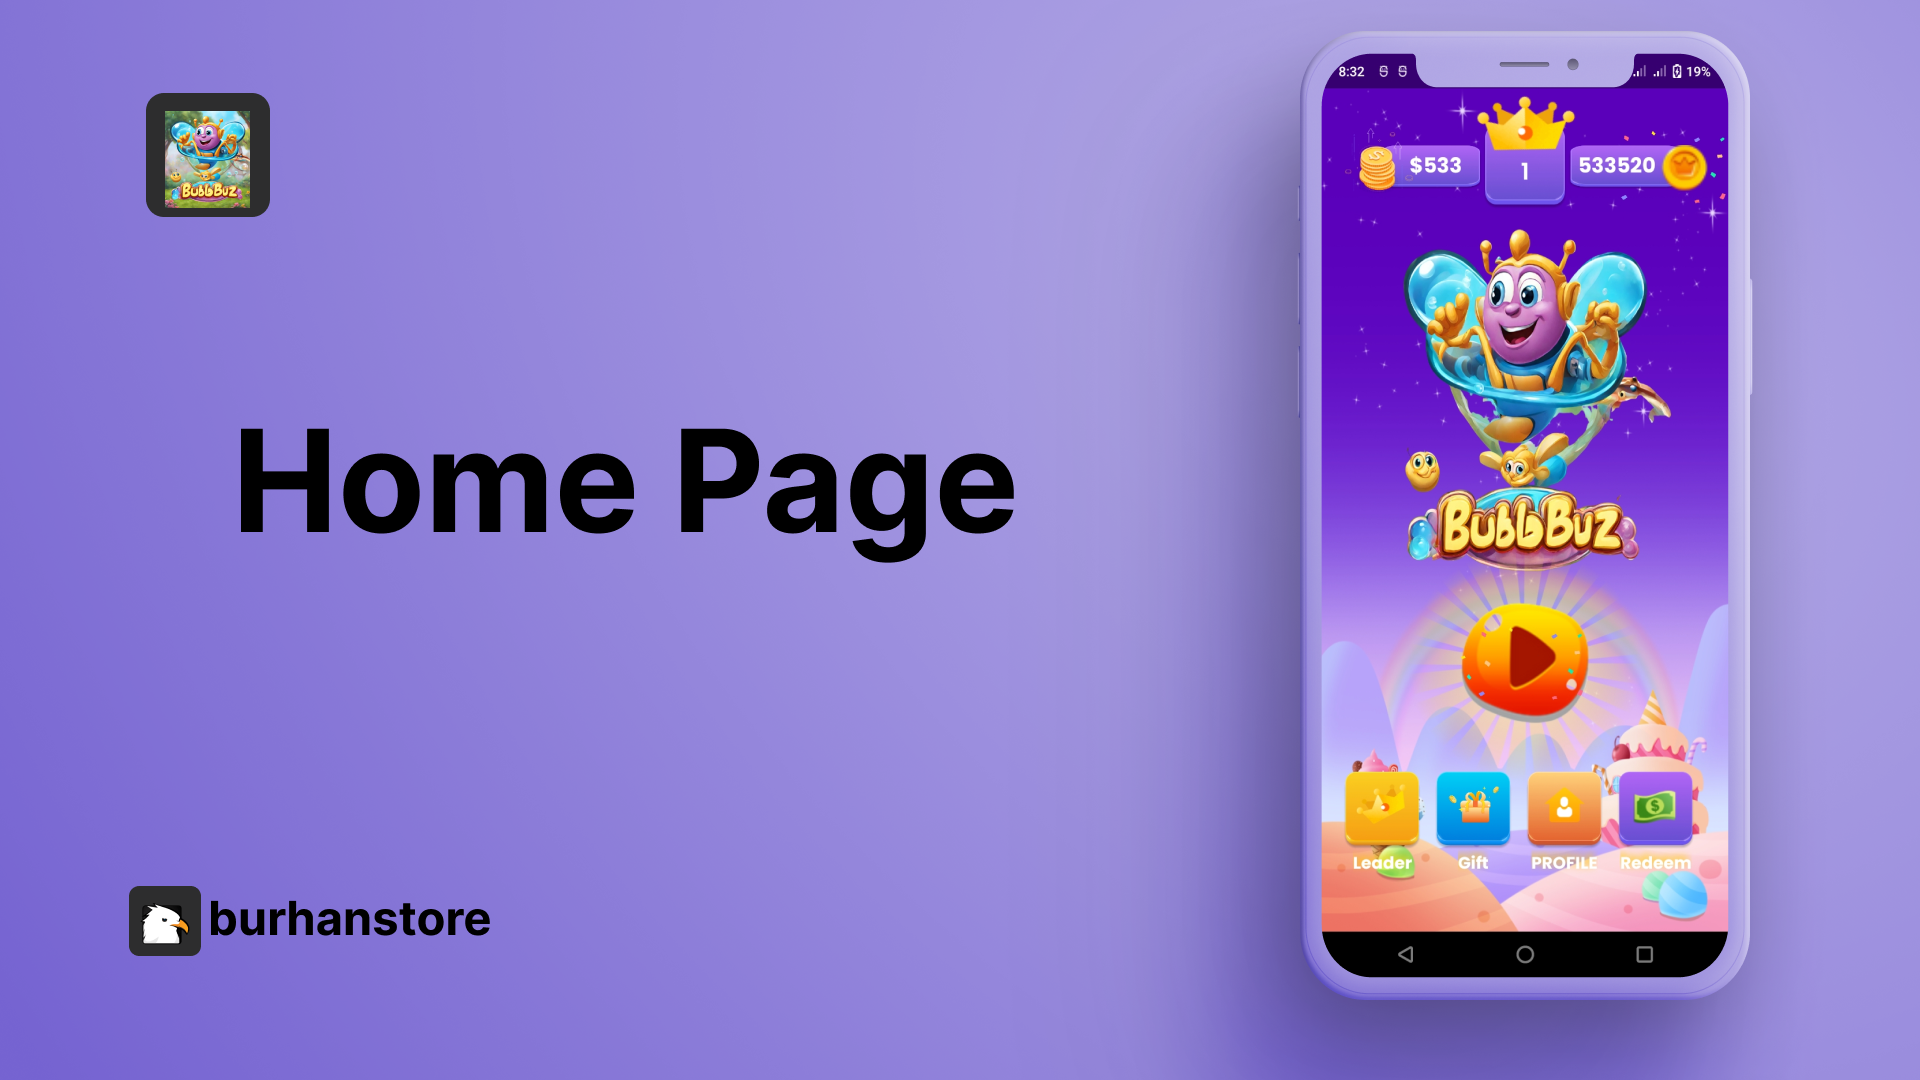 Bubb Buz Bubble Shooter Game - Rewards Earning Android Studio Project - 6